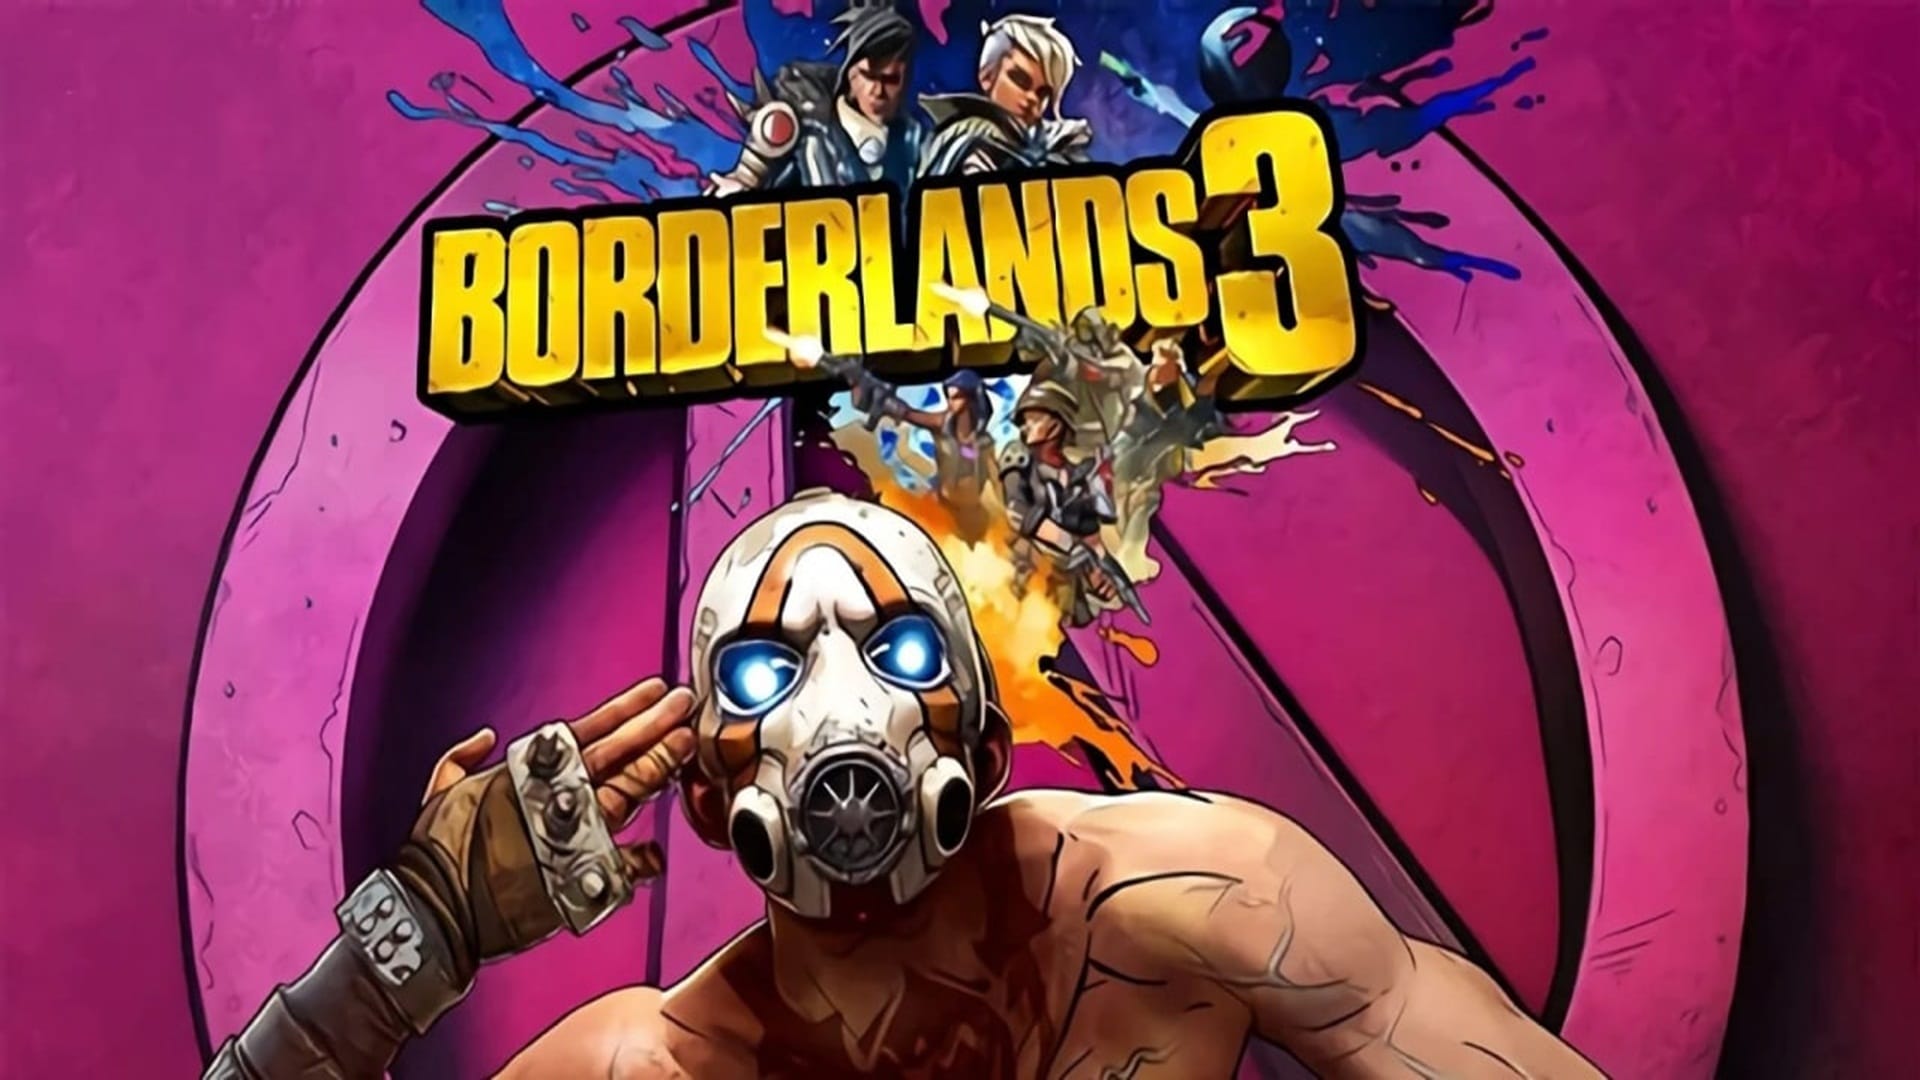 Borderlands 3 Offers Players A Shift Code To Get A Diamond Key, GamersRD